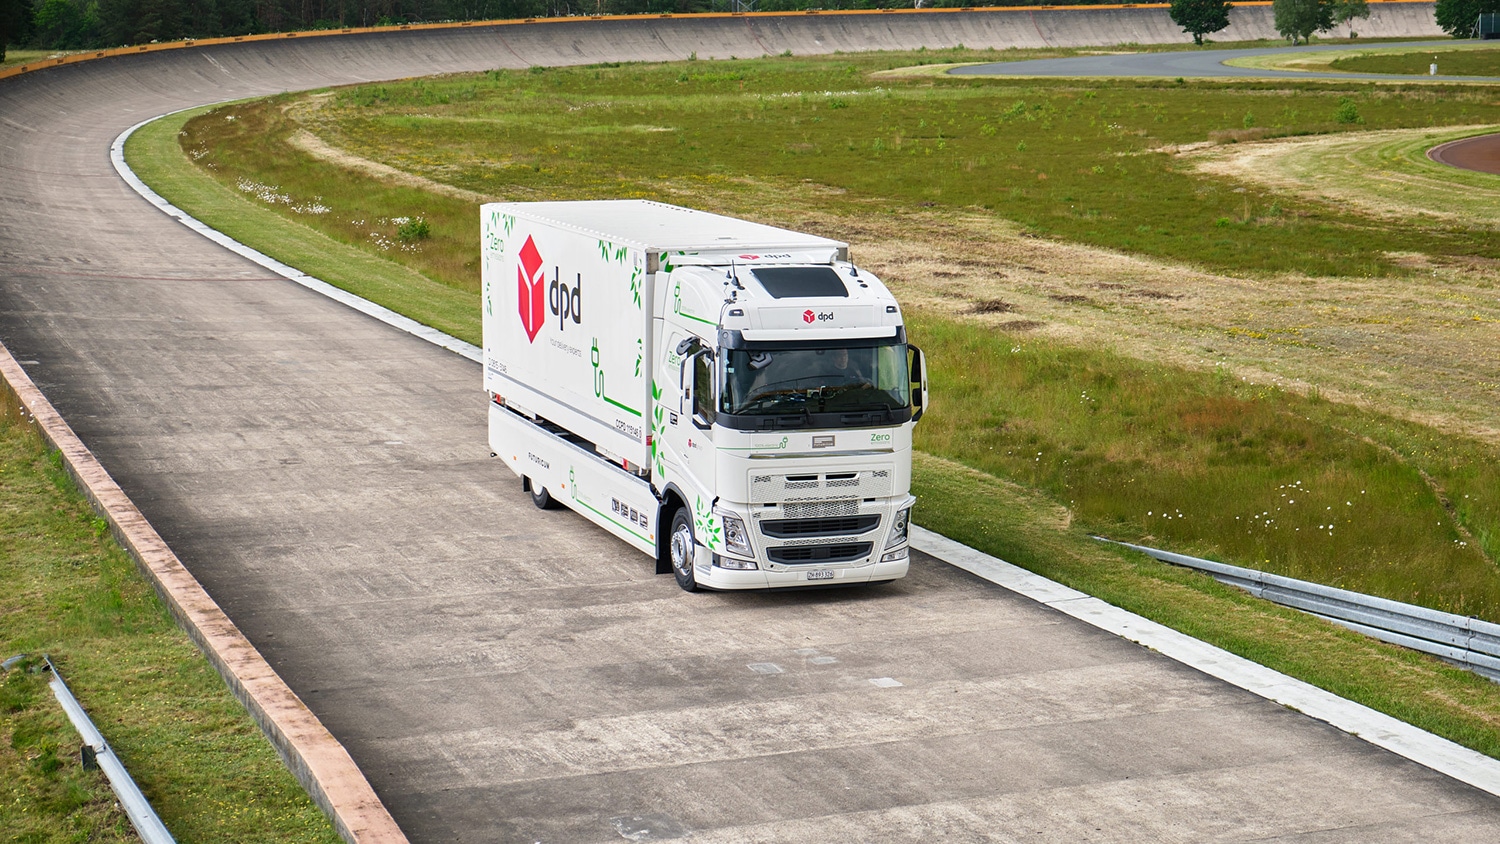 Futuricum e-truck set a world record for driving 683 miles on a single charge.